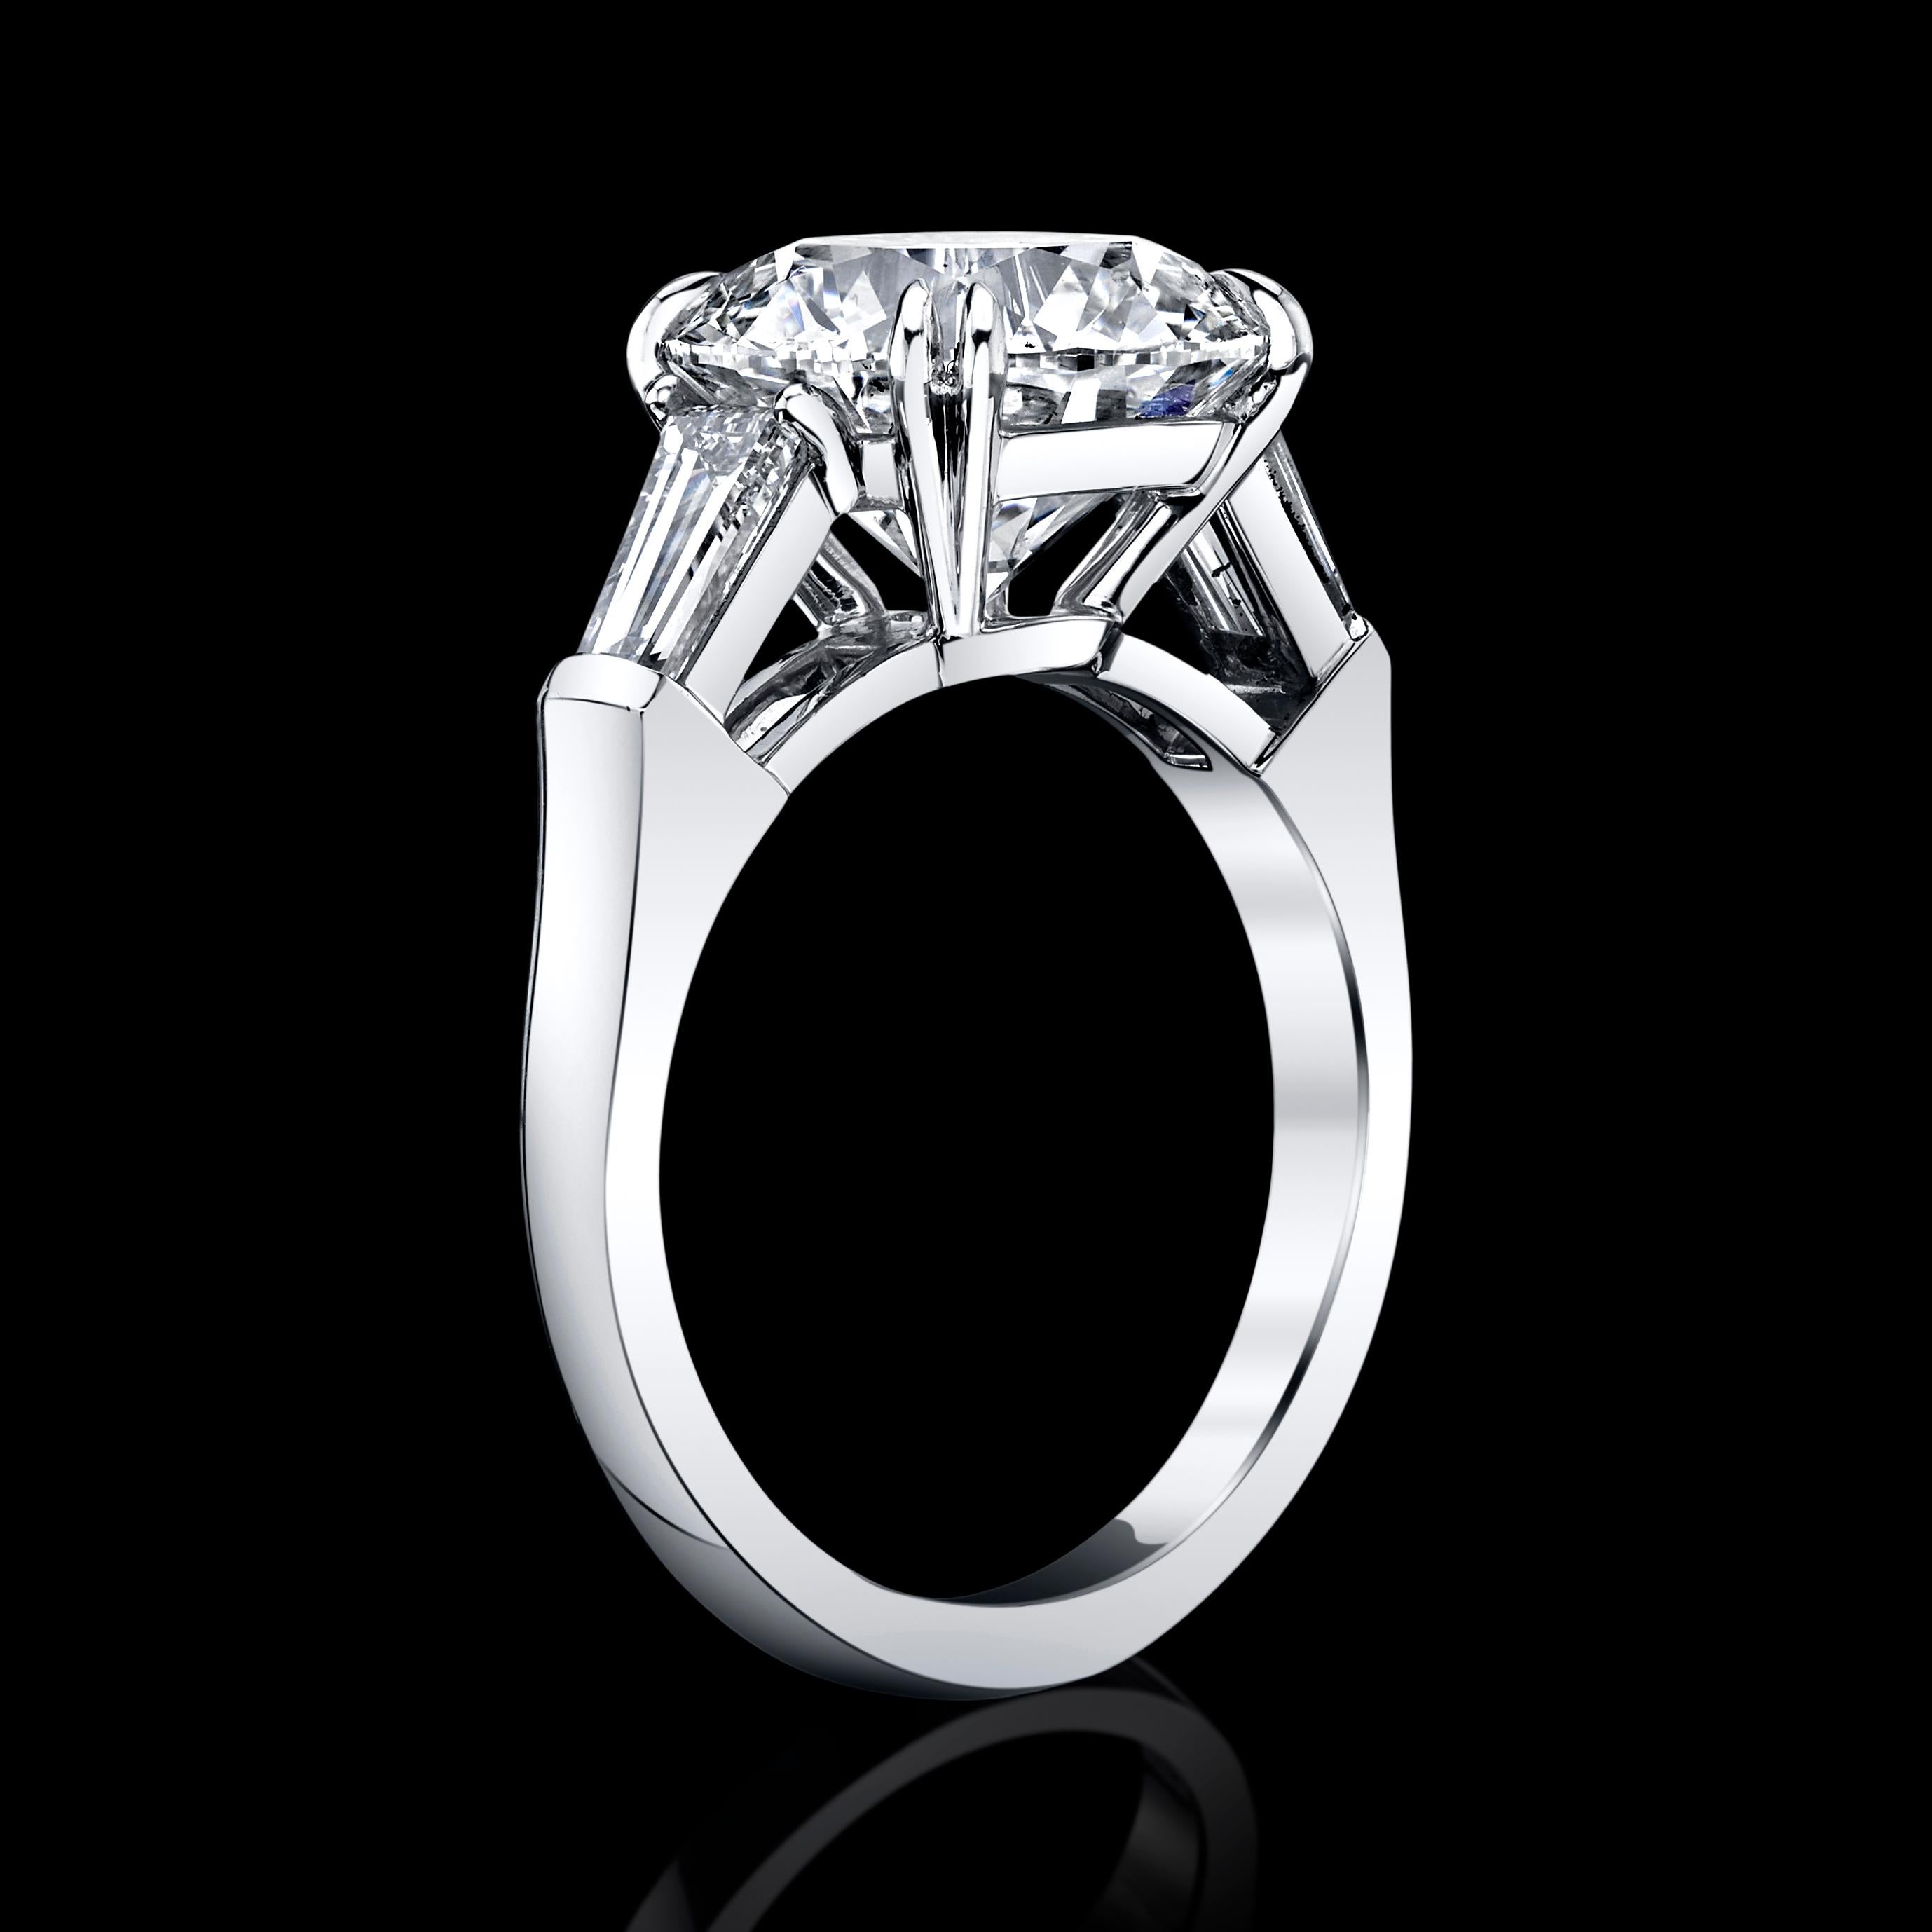 This 5.42ct Round Brilliant Diamond is set in a classic setting platinum ring with two baguettes side diamonds = 0.90cttw
This Diamond is GIA Certified #119228255